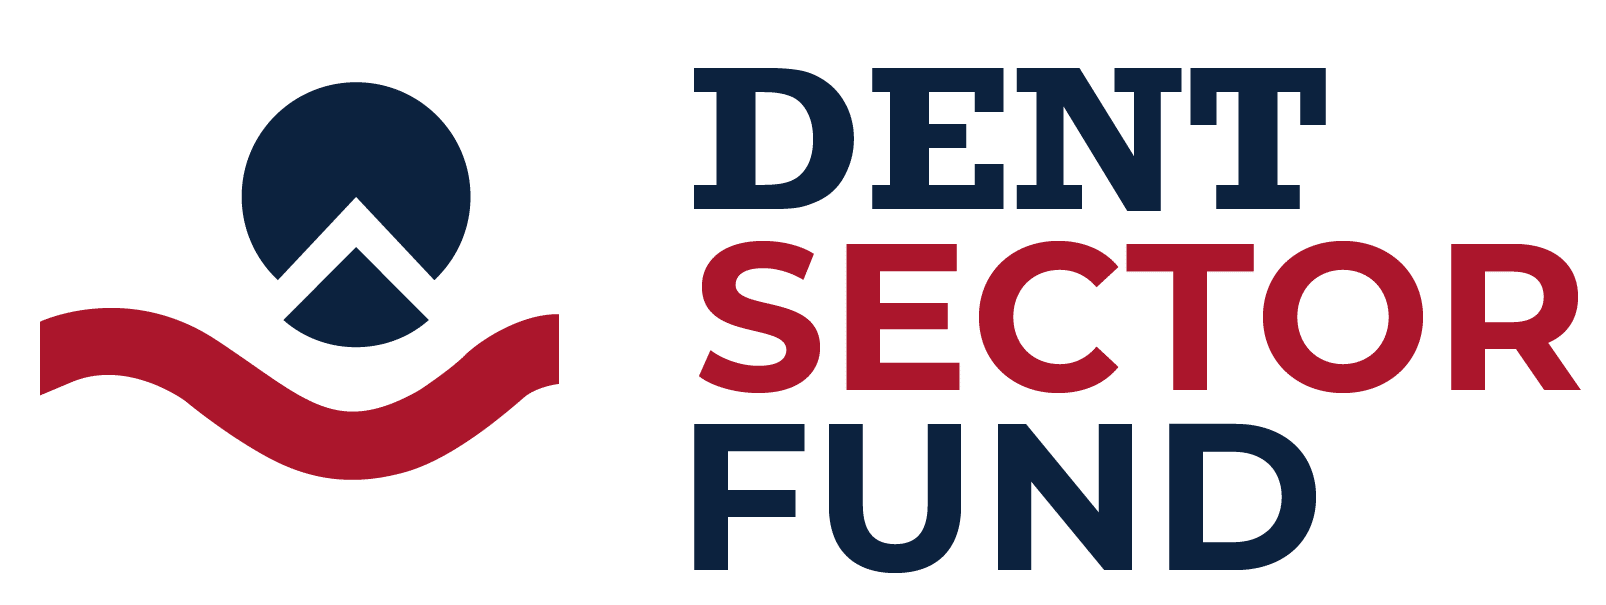 Dent Sector Fund